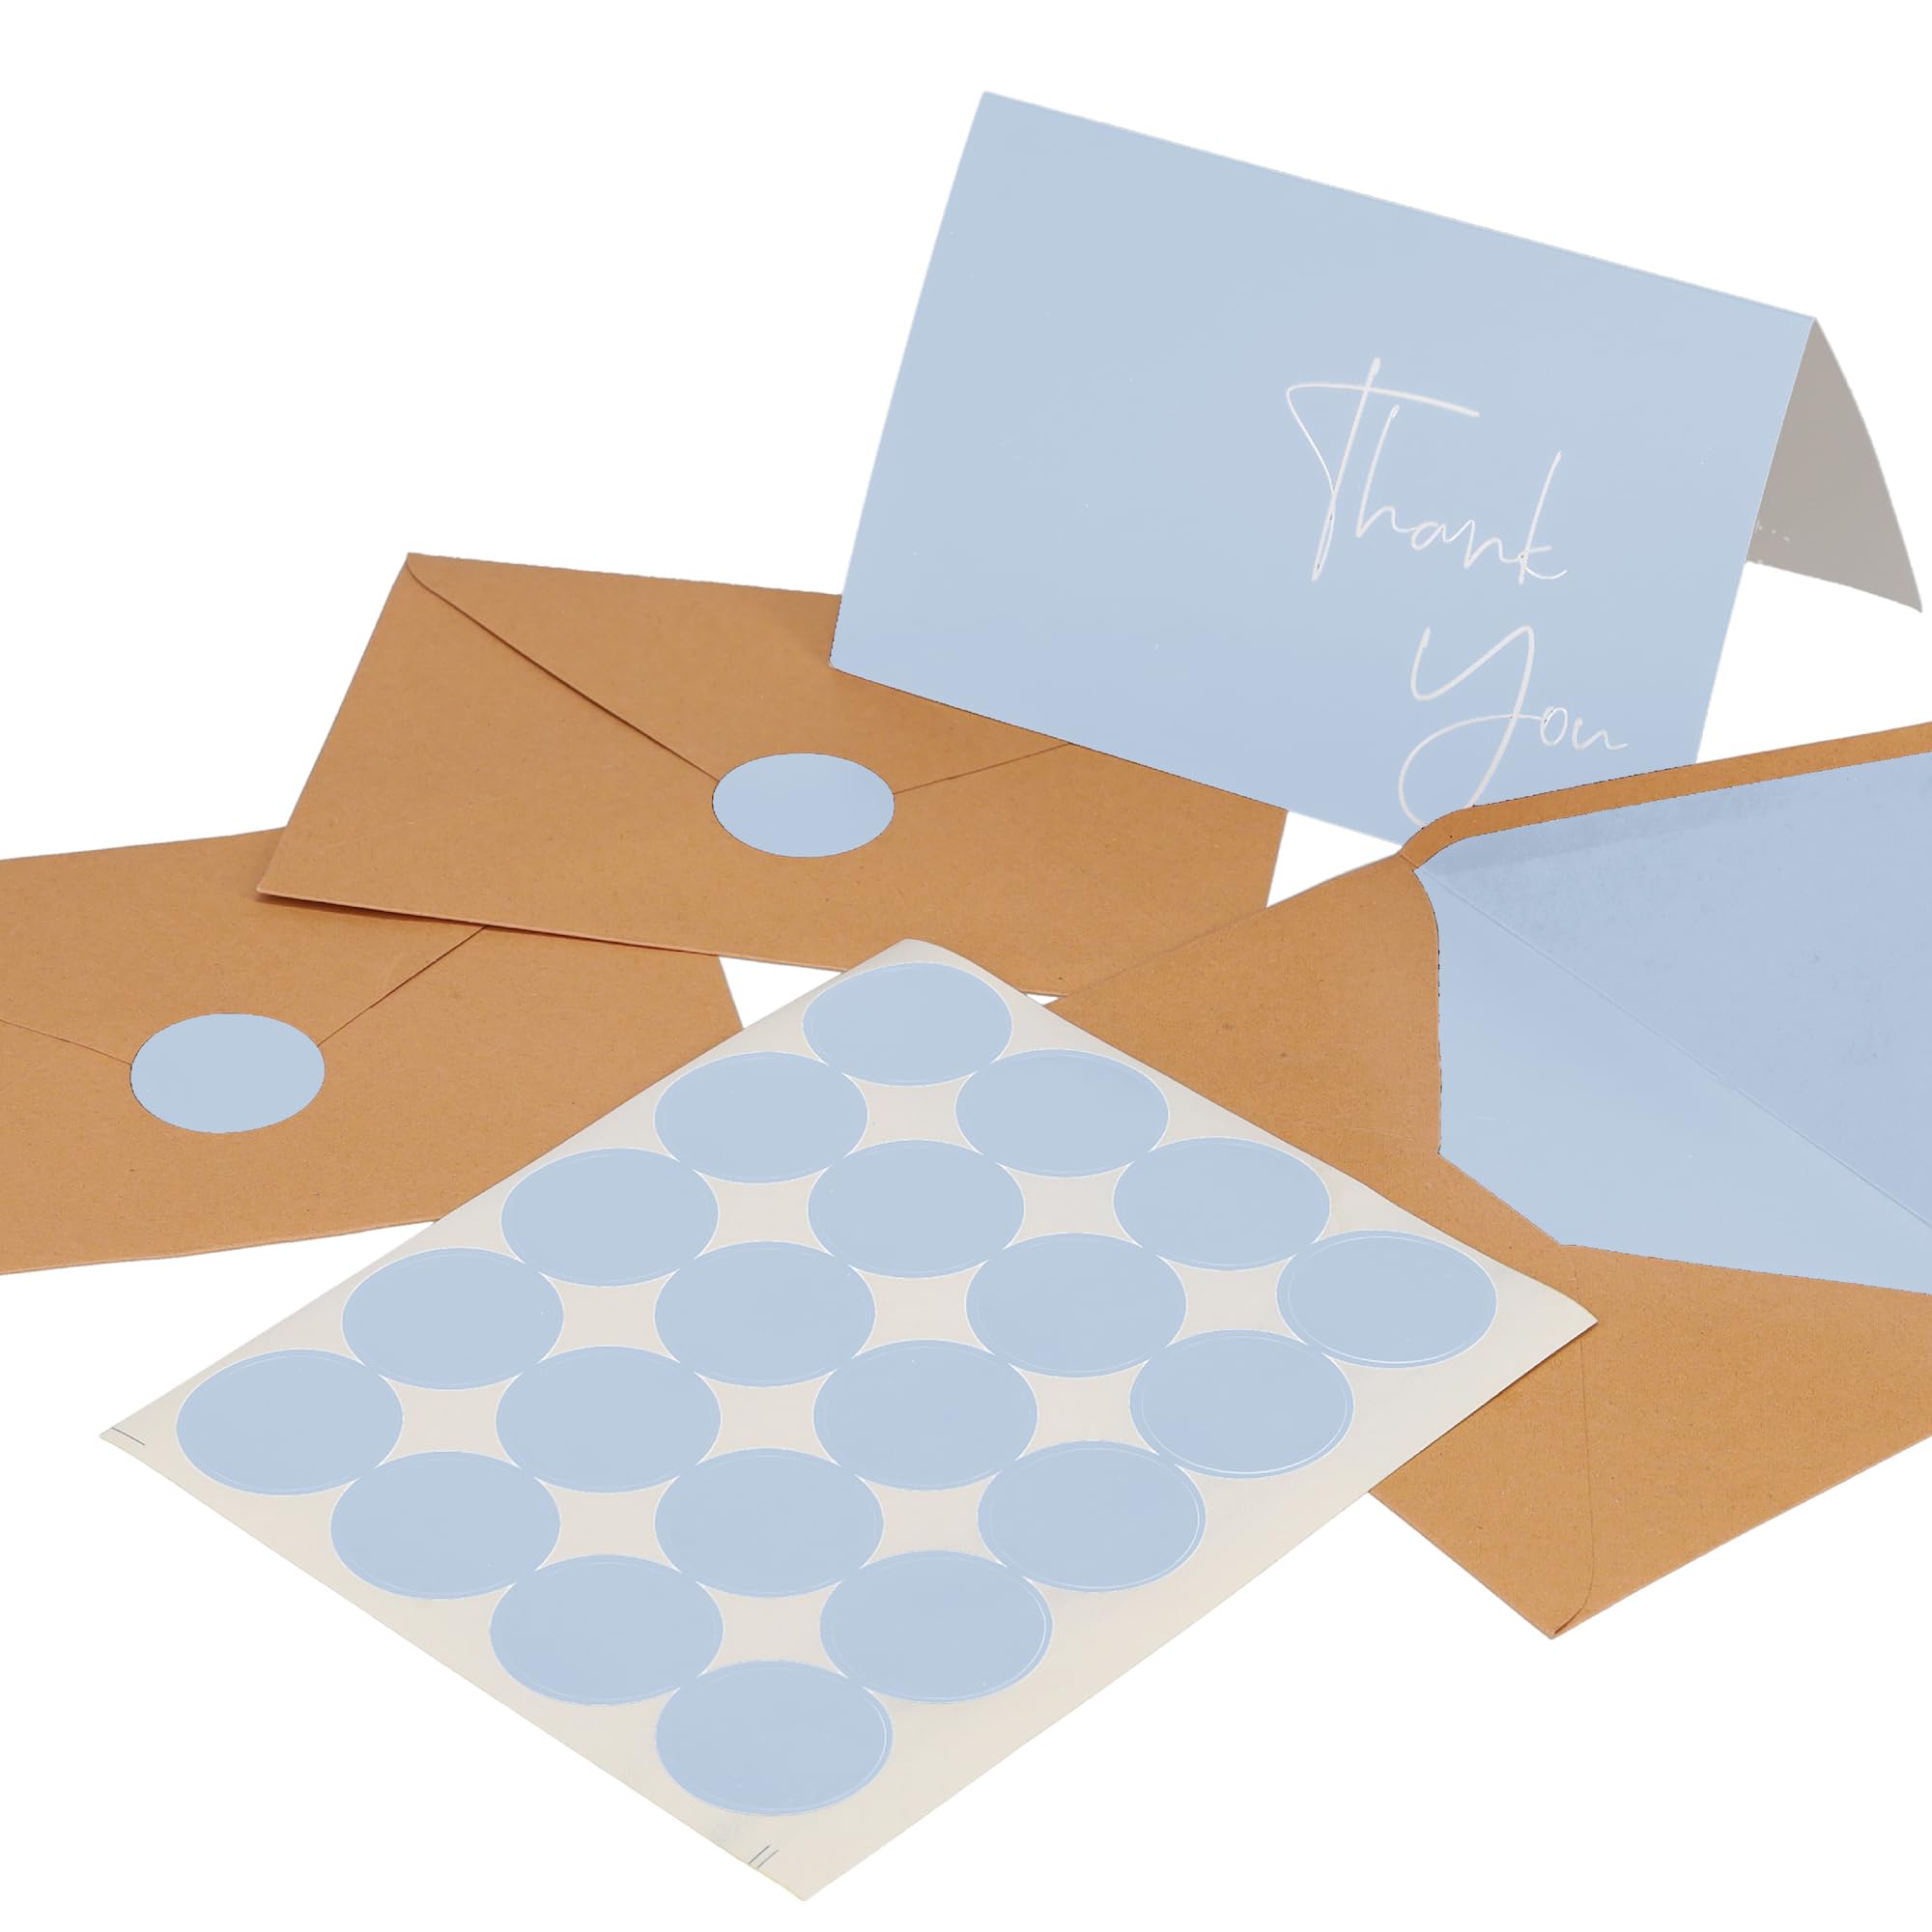 VNS Creations 100 pack Thank You Cards with Envelopes & Stickers - Classy 4x6 Blank Thank You Cards Bulk Box Set - Large Thank You Notes for Wedding, Small Business, Baby & Bridal Shower (Light Blue)